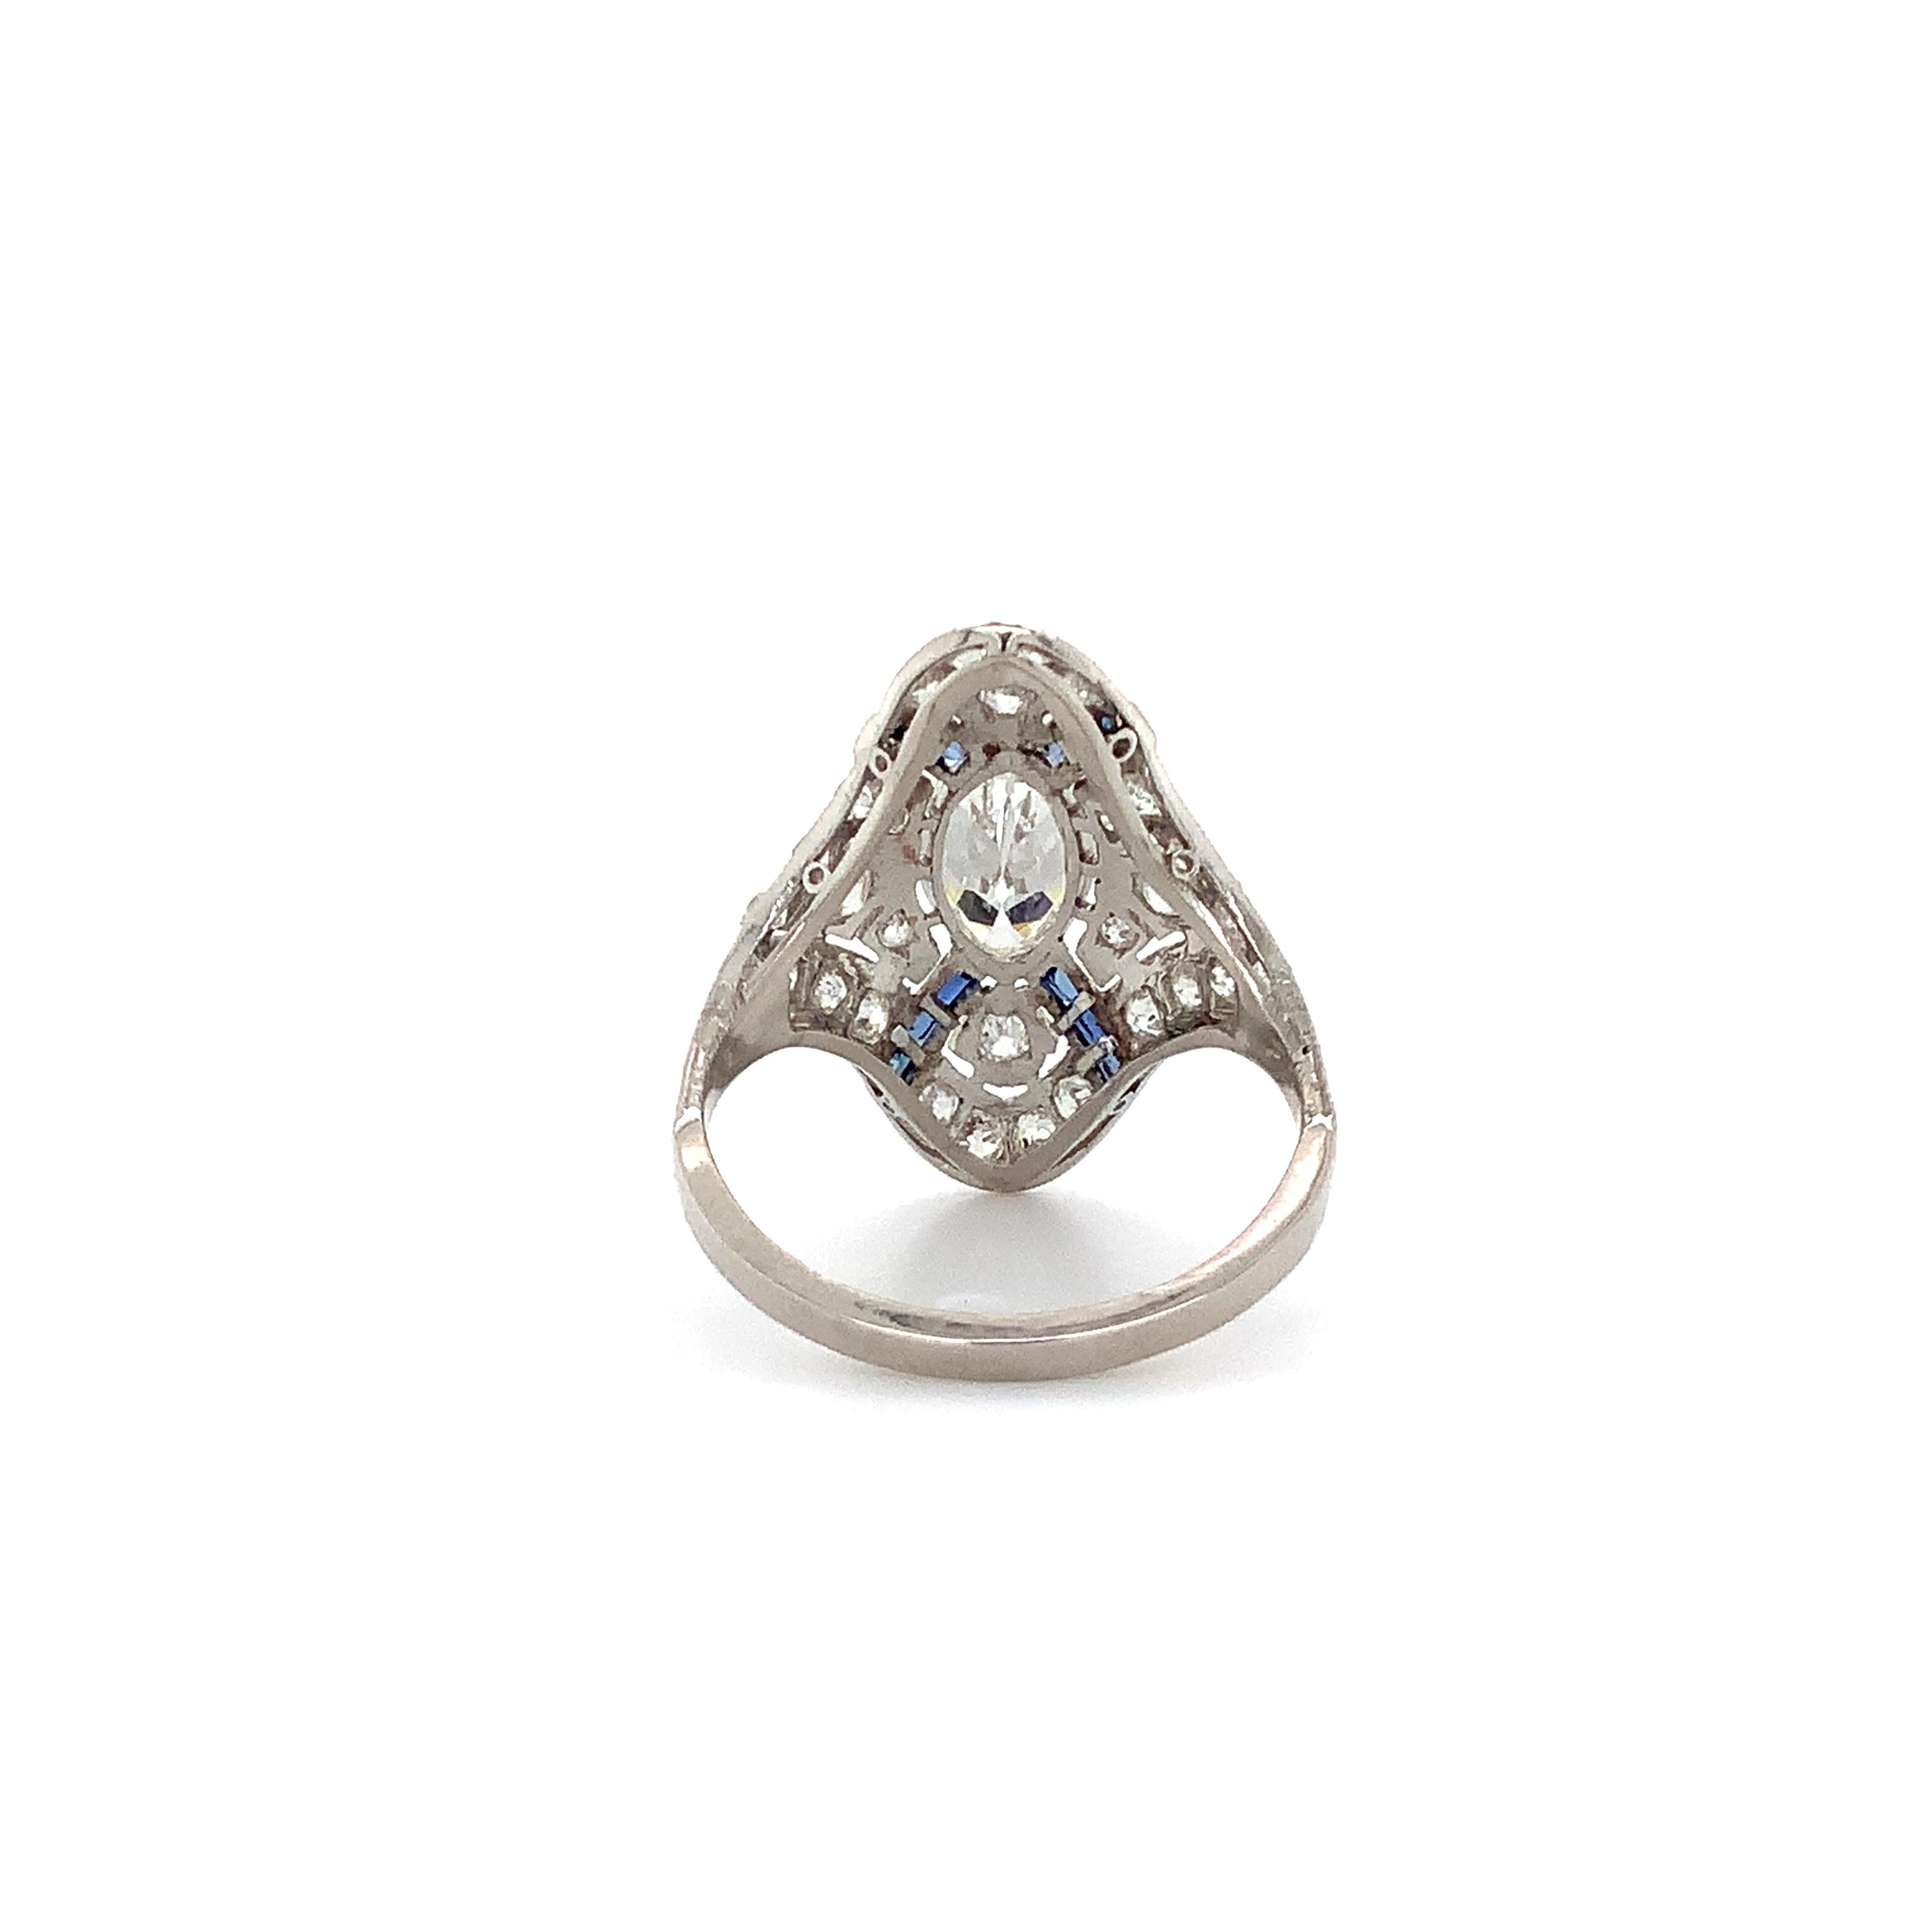 Antique Edwardian, Art Deco Filigree Marquise Diamond and Caliber Sapphire Ring For Sale 2